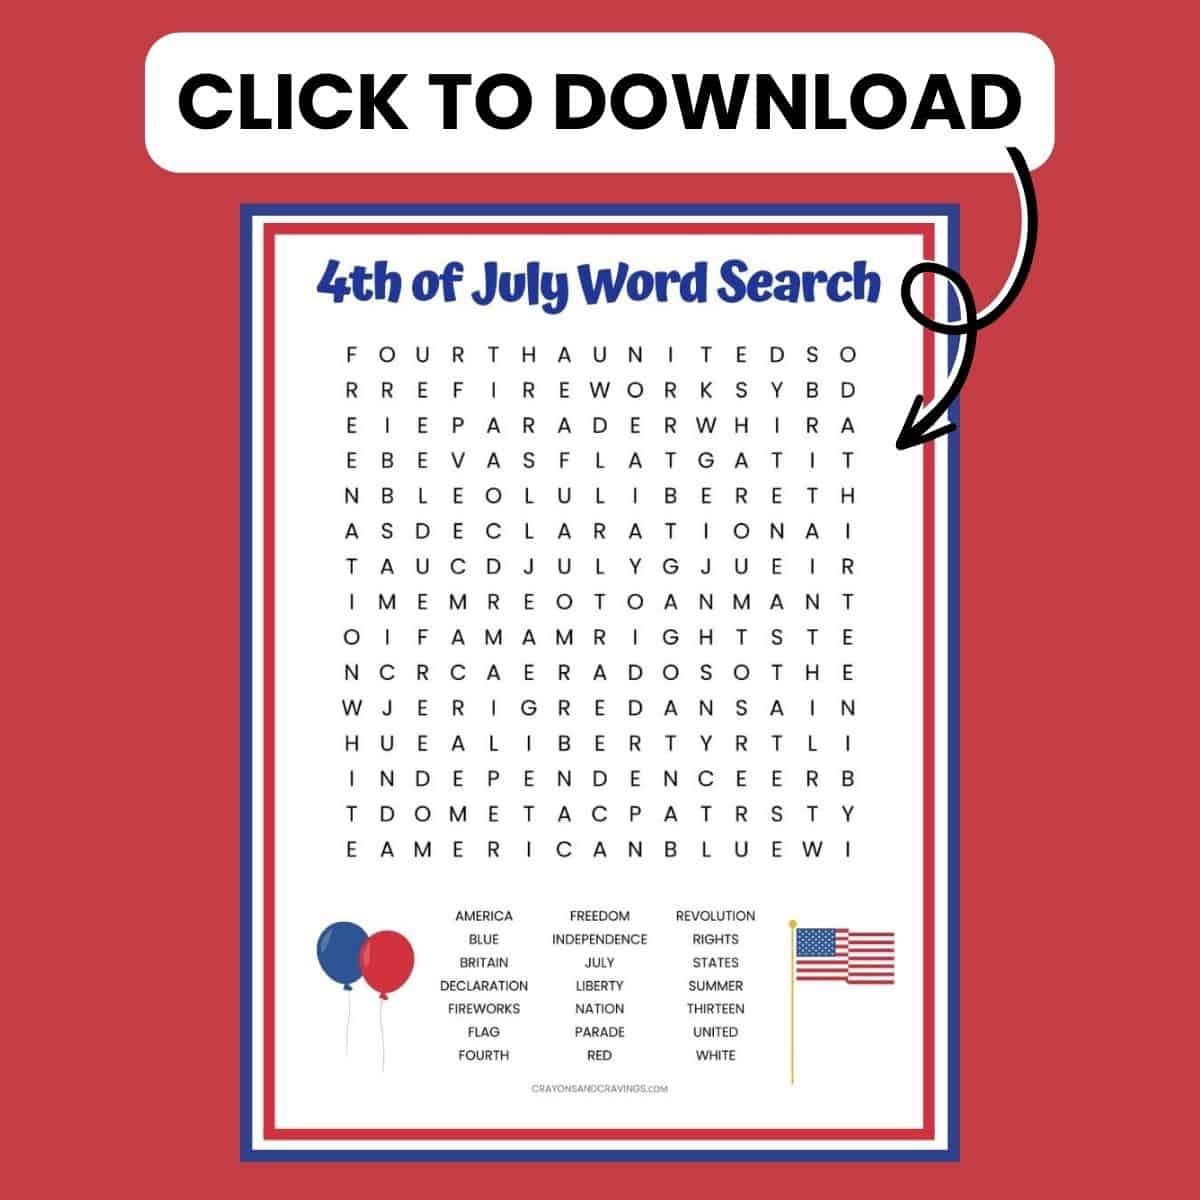 Click to sign up and download the 4th of July Word Search Printable.